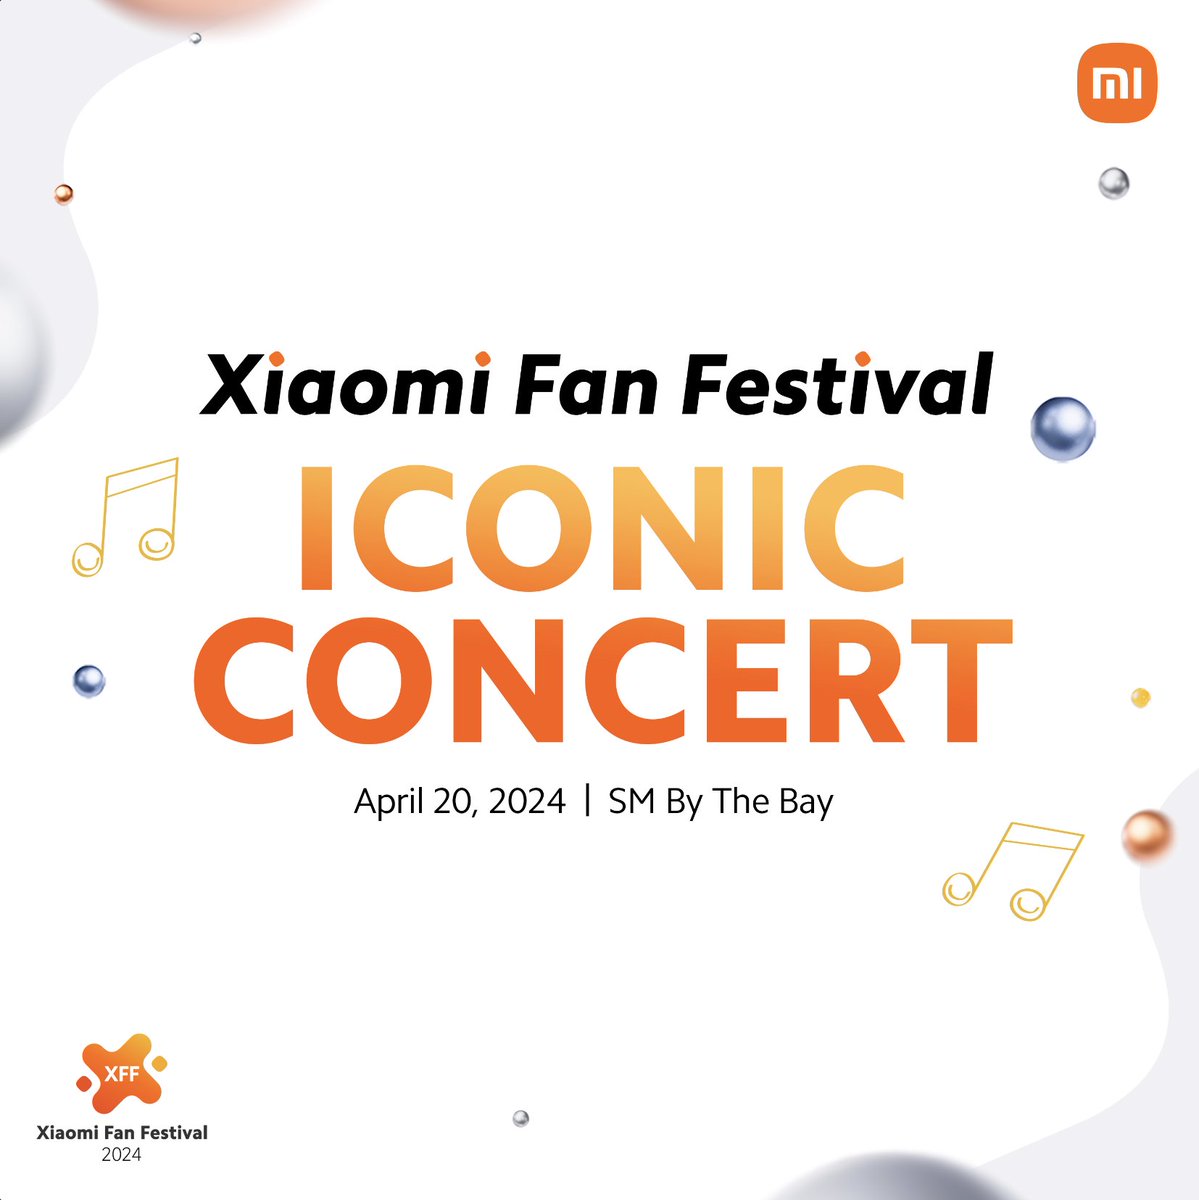 Who's ready for Xiaomi's Iconic Concert? 🕺🏻💃🏻 Watch out for our announcement on the Iconic performers 🎤🎶. Comment down below on who you want to be on our stage ⬇️ #XiaomiFanFestival2024 #RedmoNote13Series #EveryShotIconic

📅 April 20, 2024 
📍 SM by the Bay